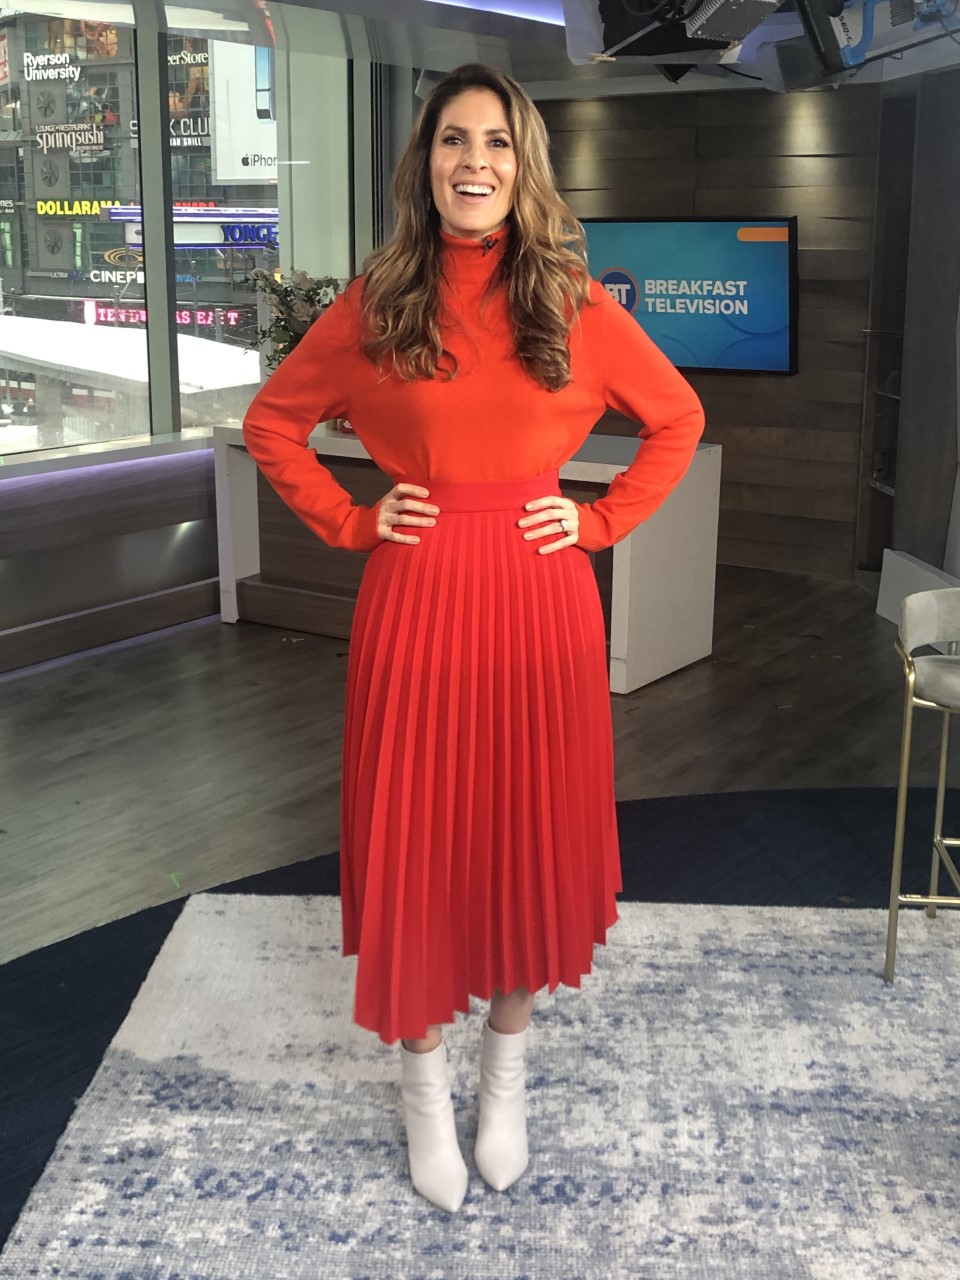 Dina wearing all red ensemble with white pointy boots